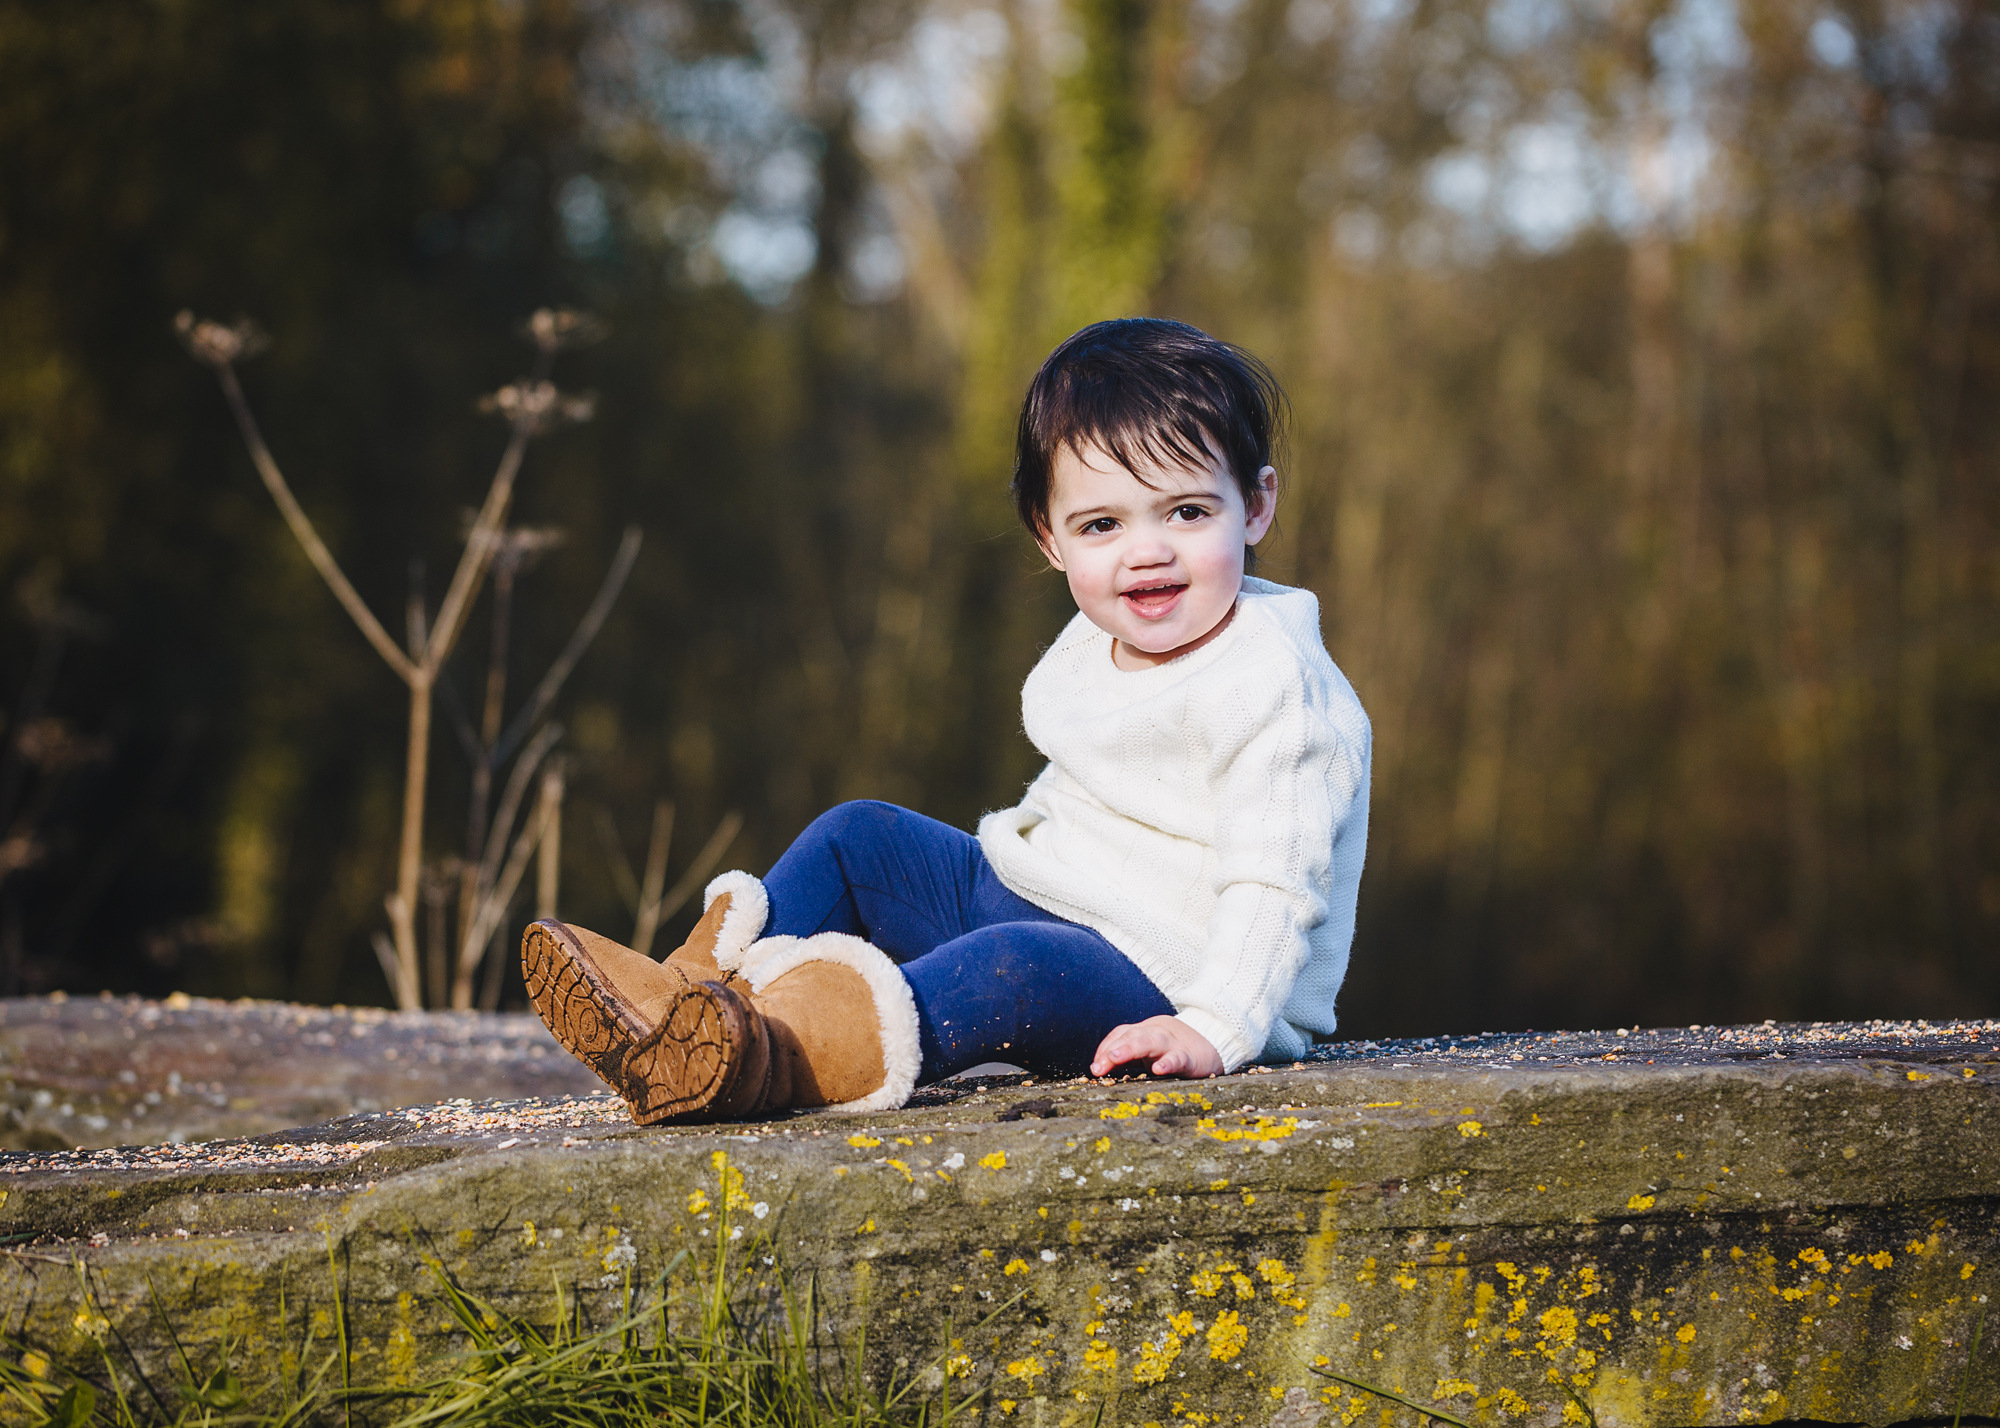 Location children's portraits south wales, caerphilly, cardiff